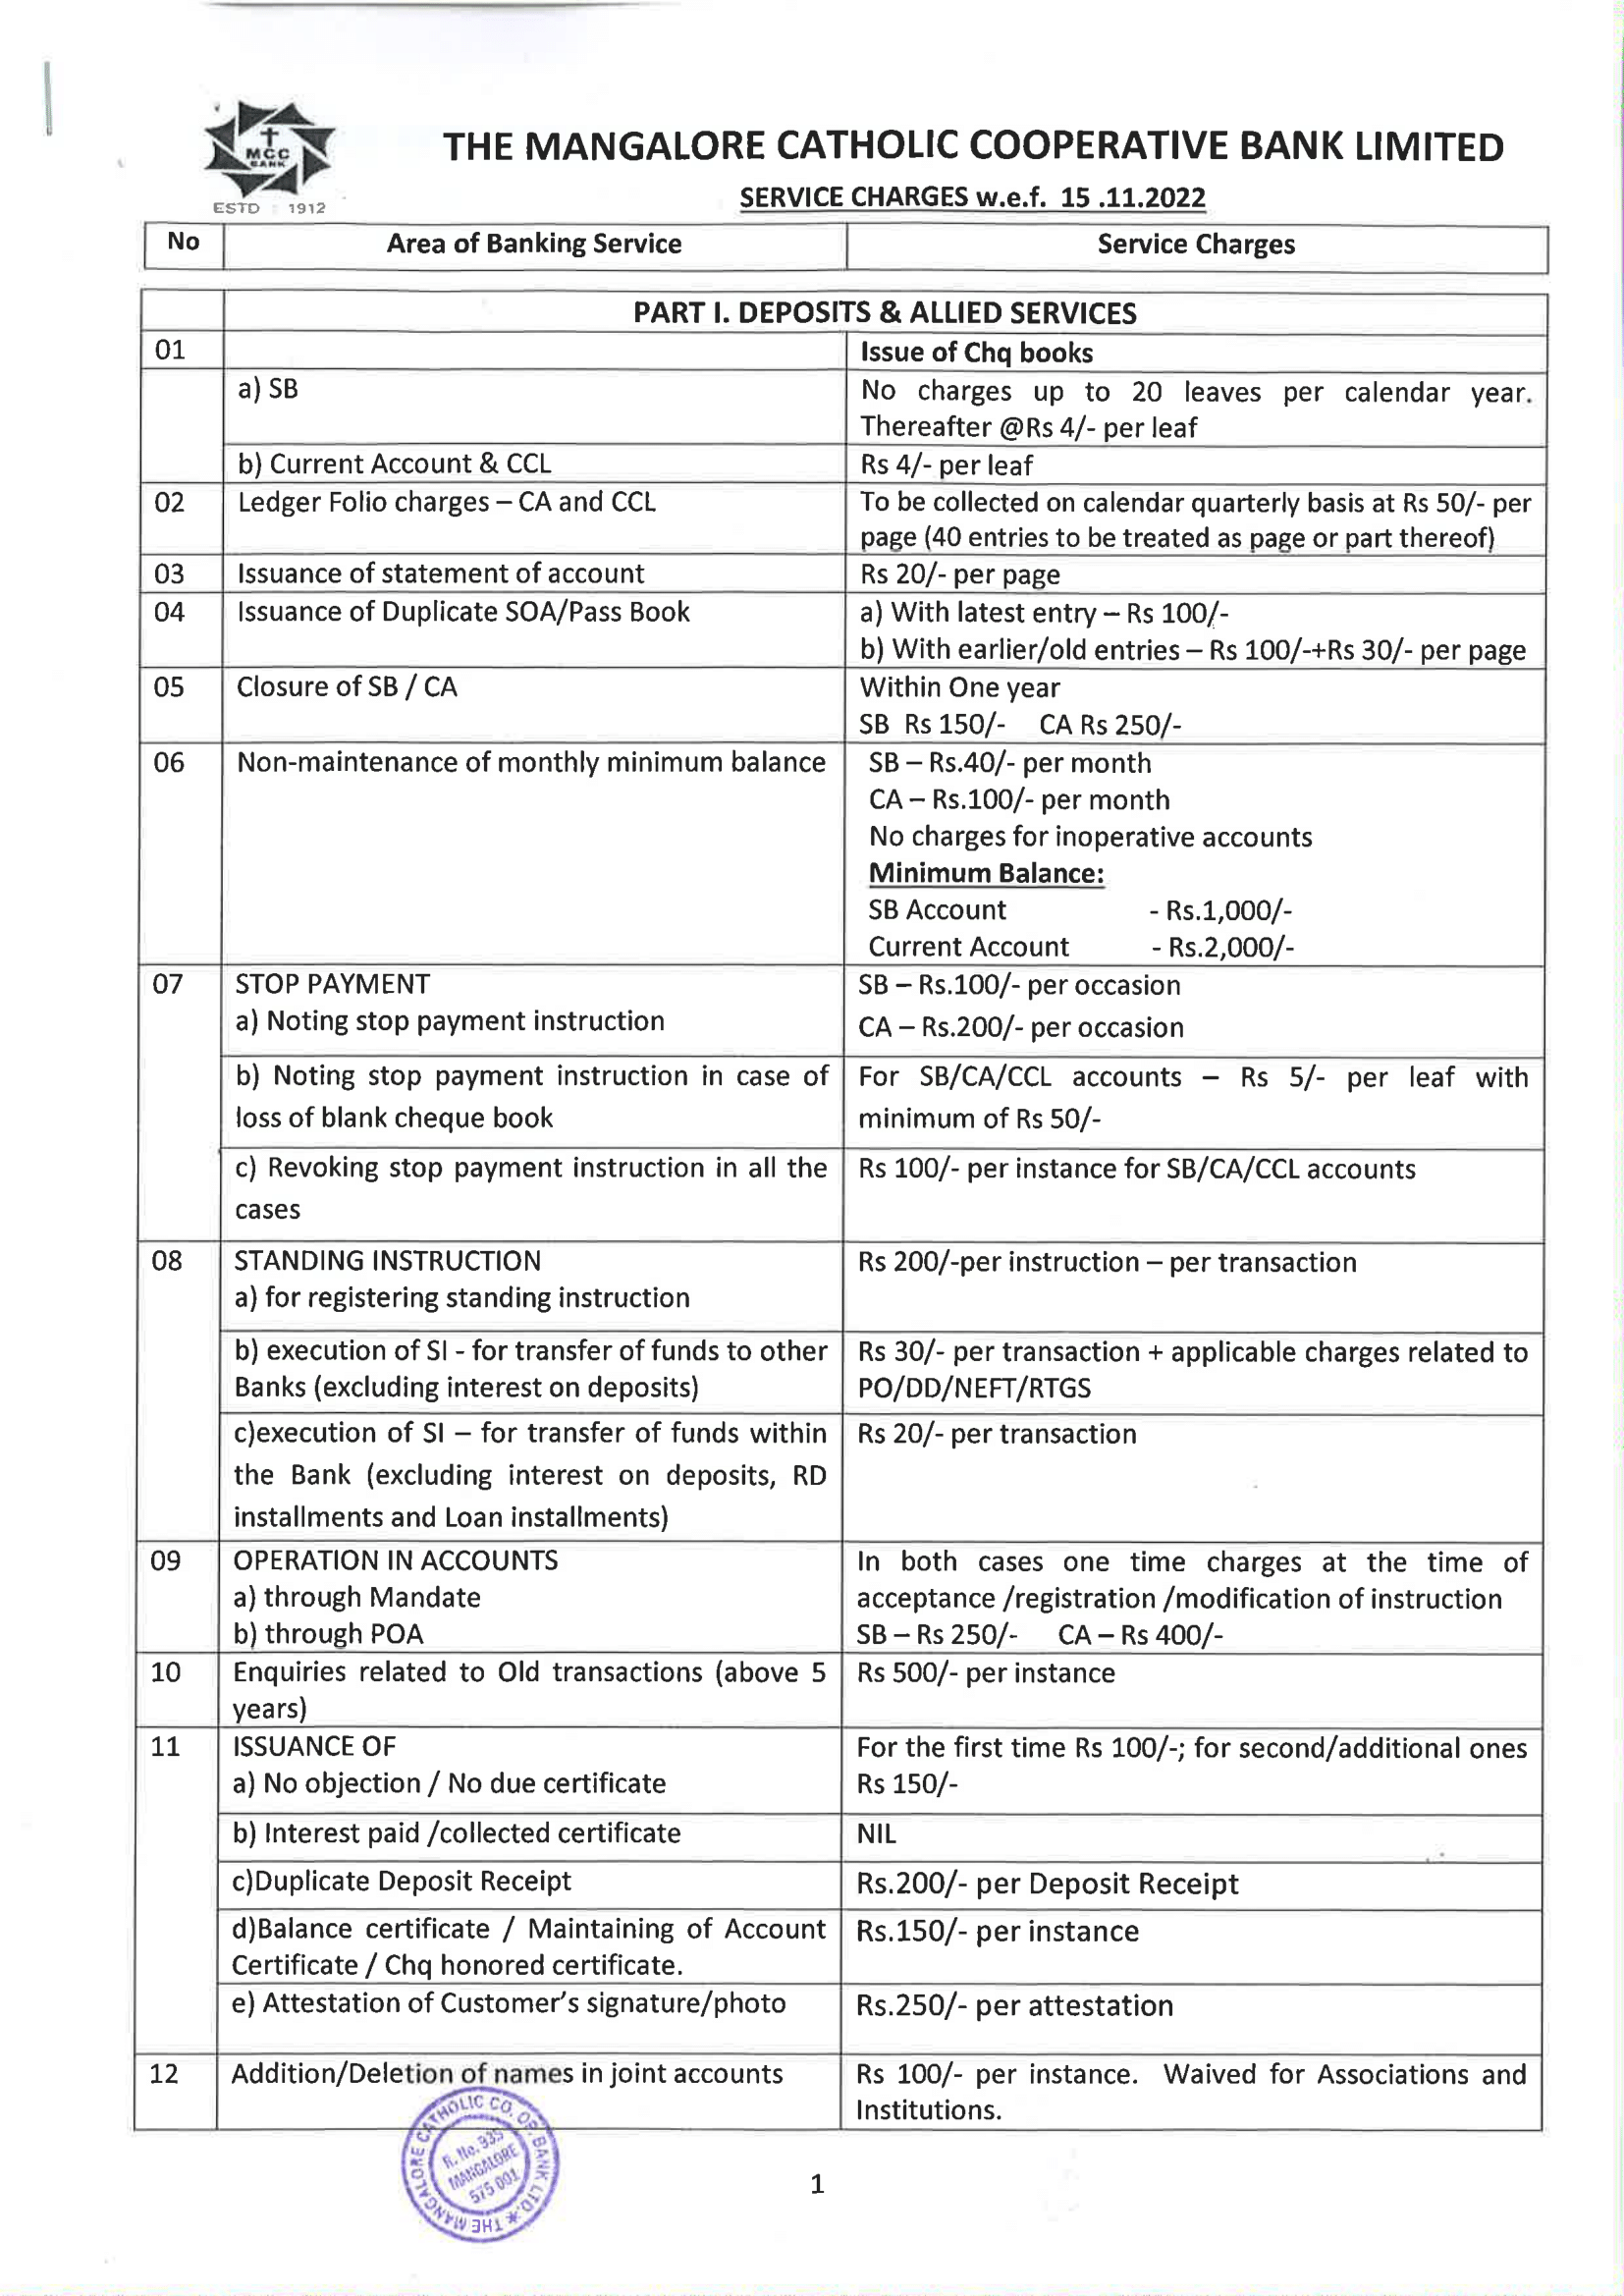 Revised_office_order_service_charges (1)-1.png